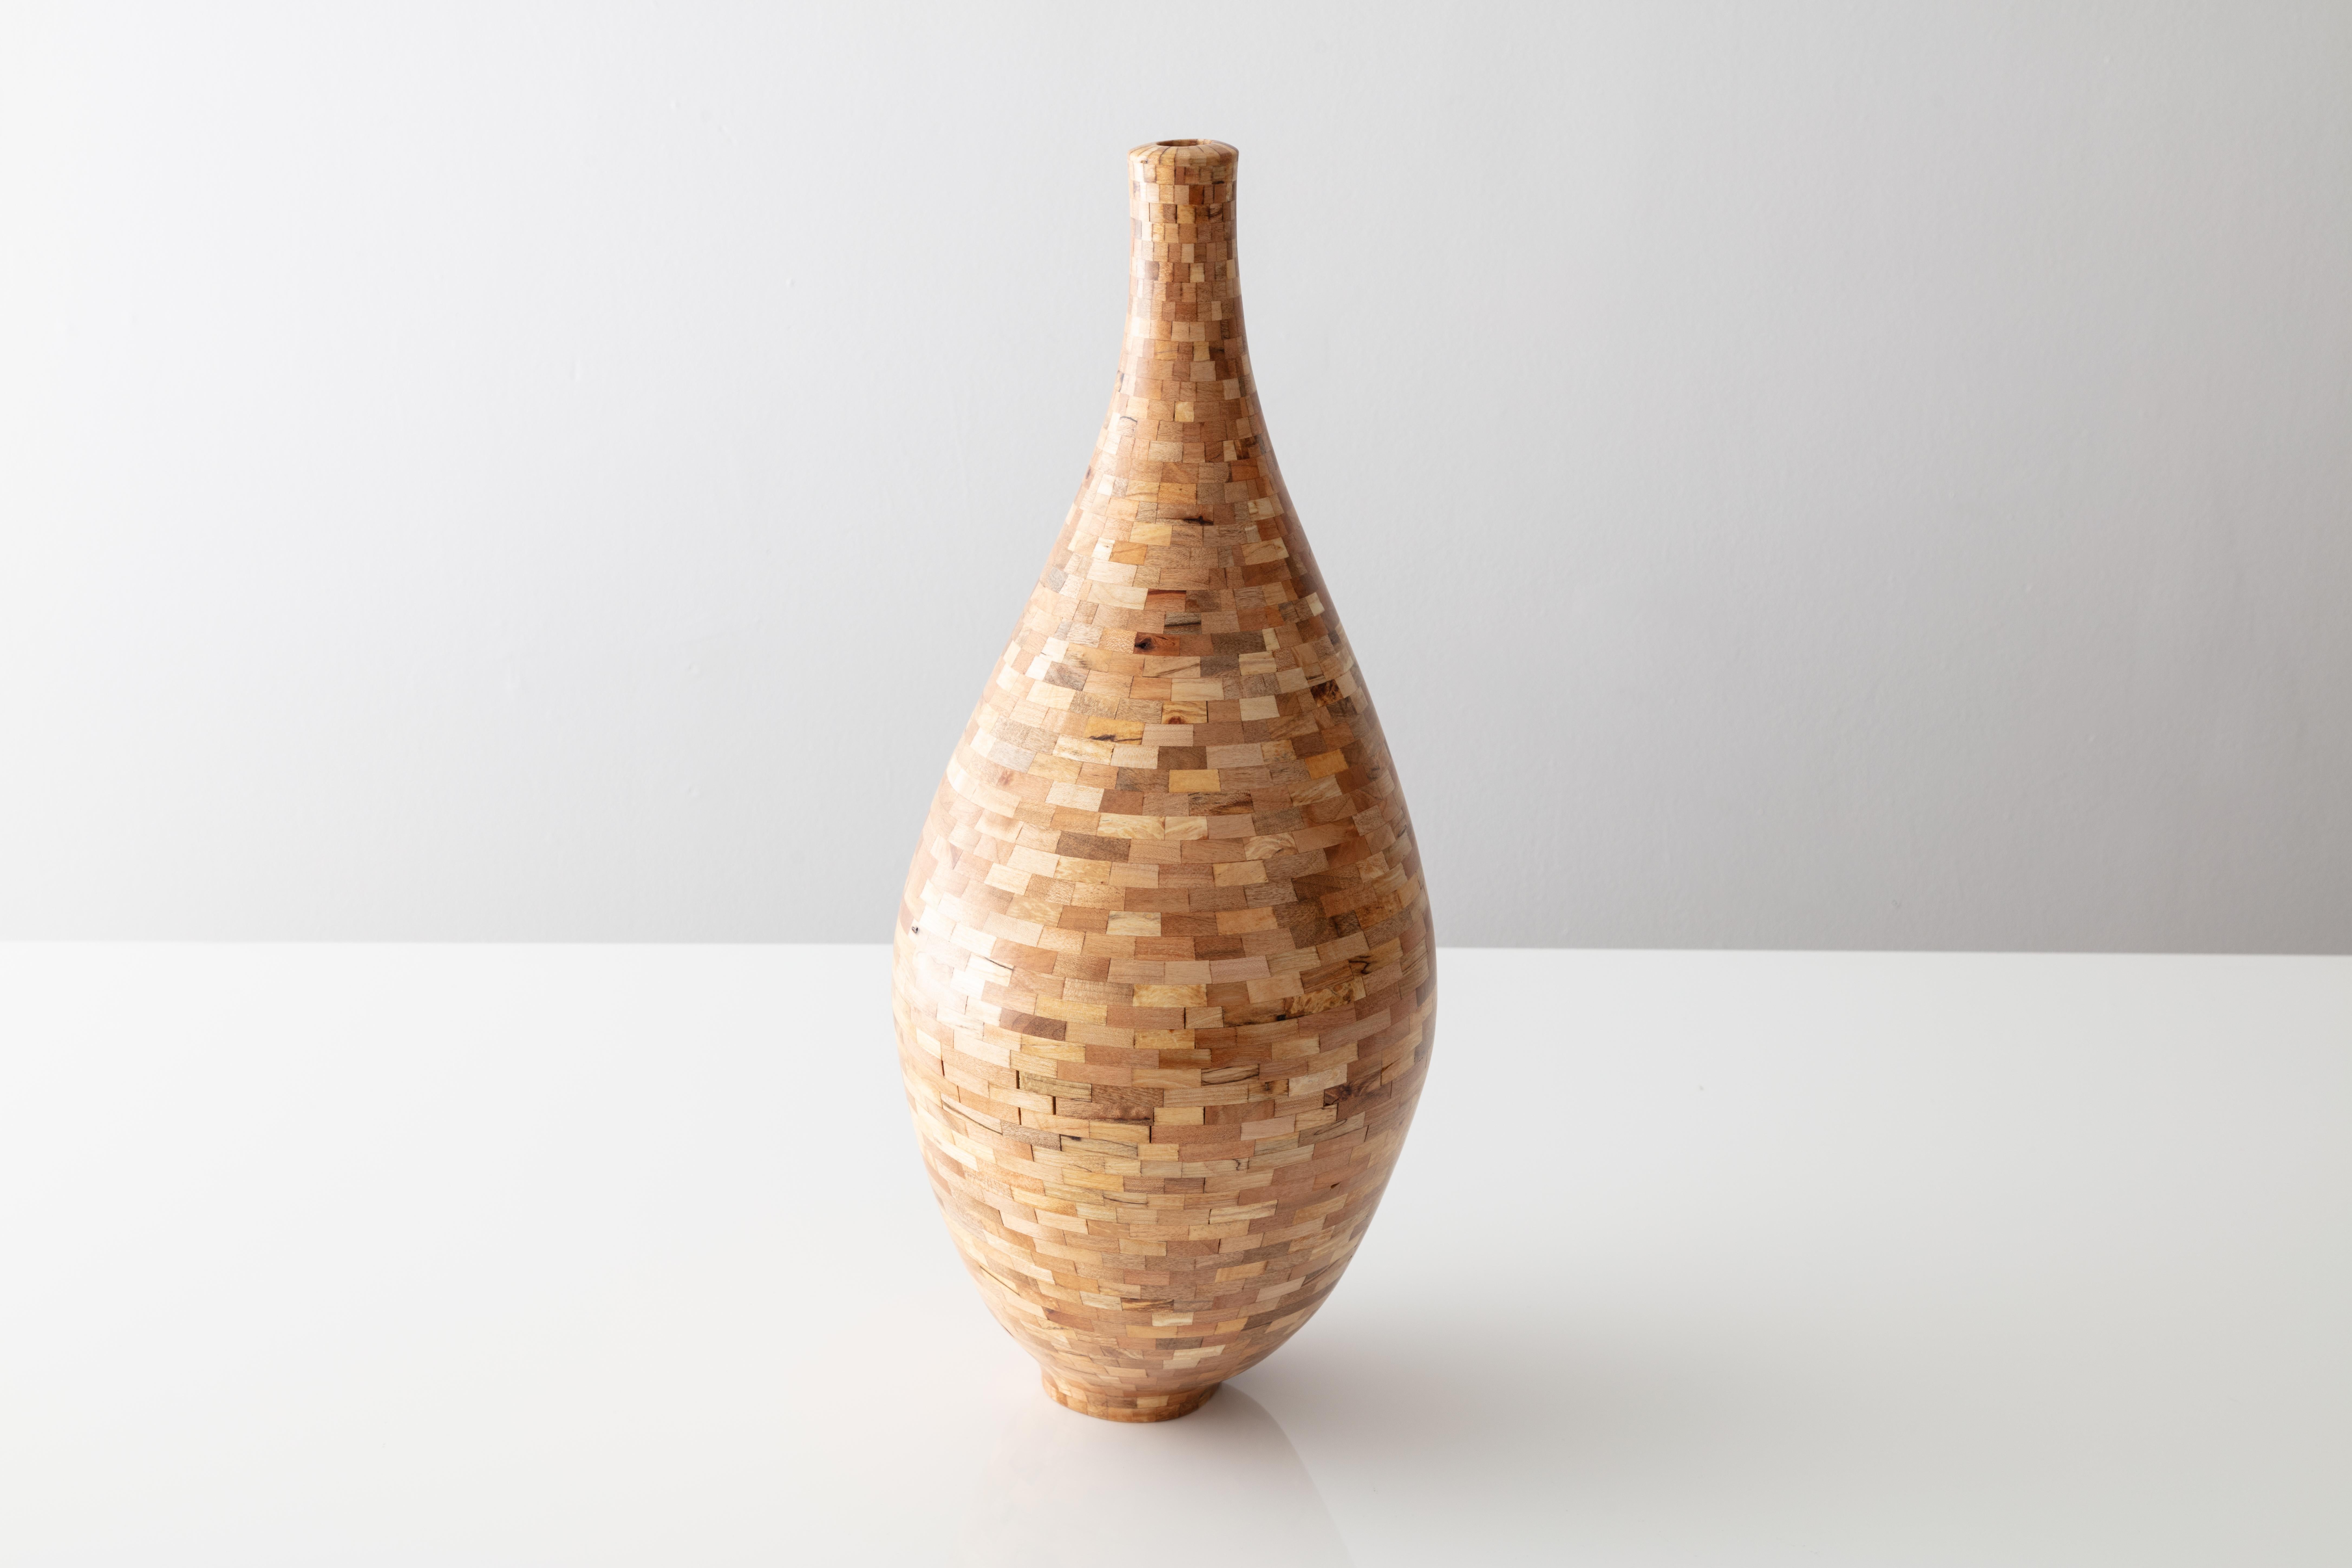 This asymmetrical vessel was created from salvaged Spalted maple. The wood's natural coloring shows off tones range all-over the place from yellow and blonde, to pink and deep browns with black striations and quilting throughout, kinda reminiscent